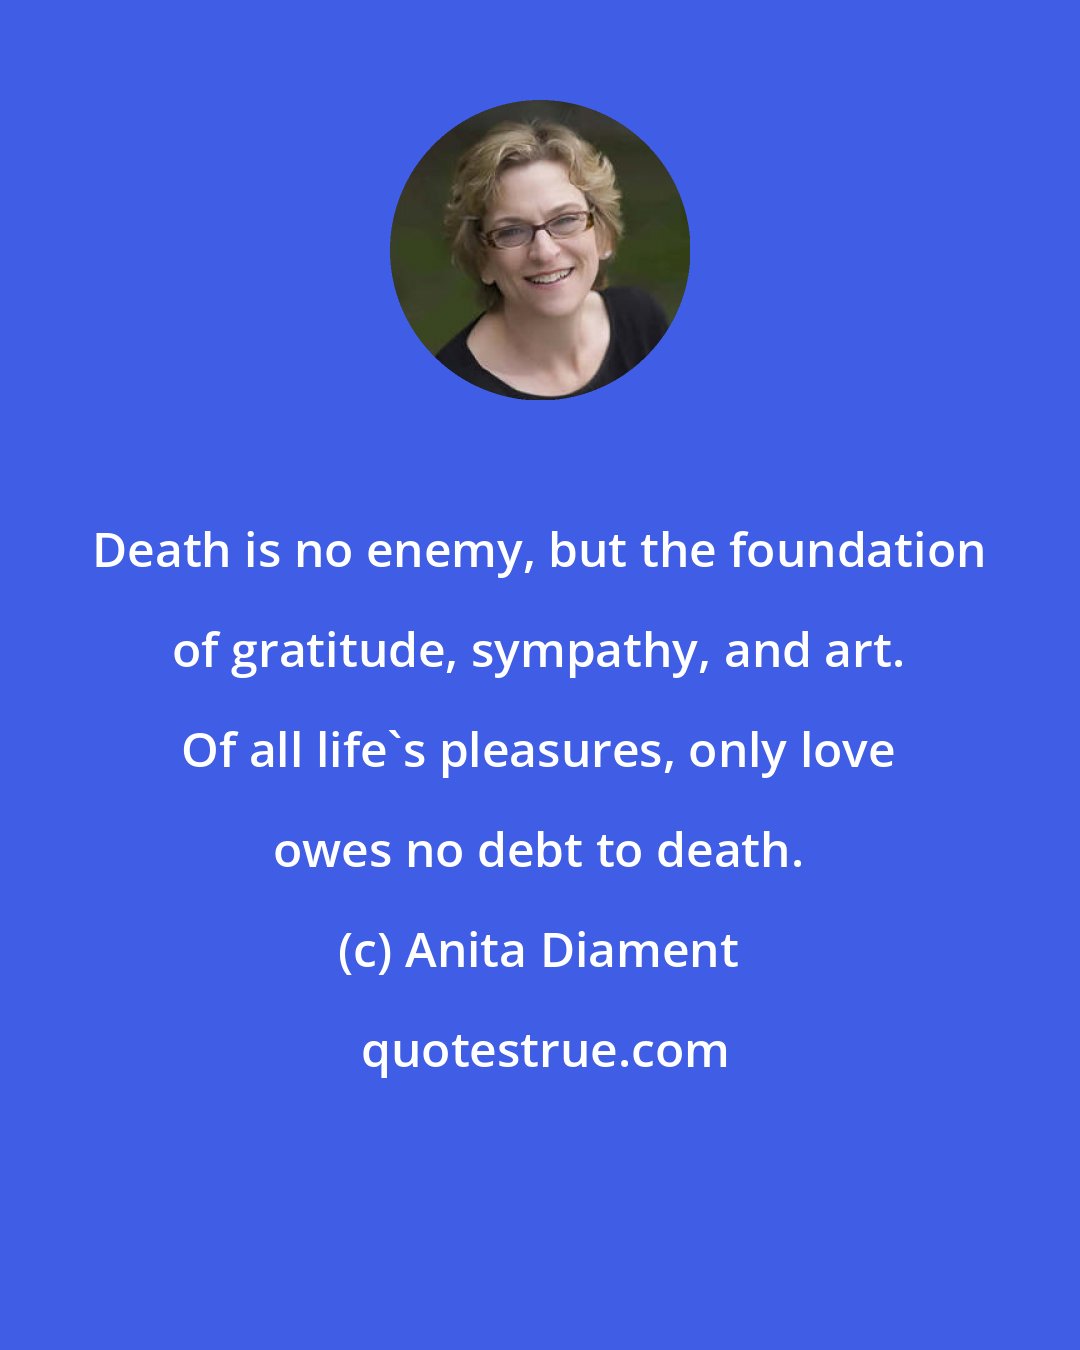 Anita Diament: Death is no enemy, but the foundation of gratitude, sympathy, and art. Of all life's pleasures, only love owes no debt to death.